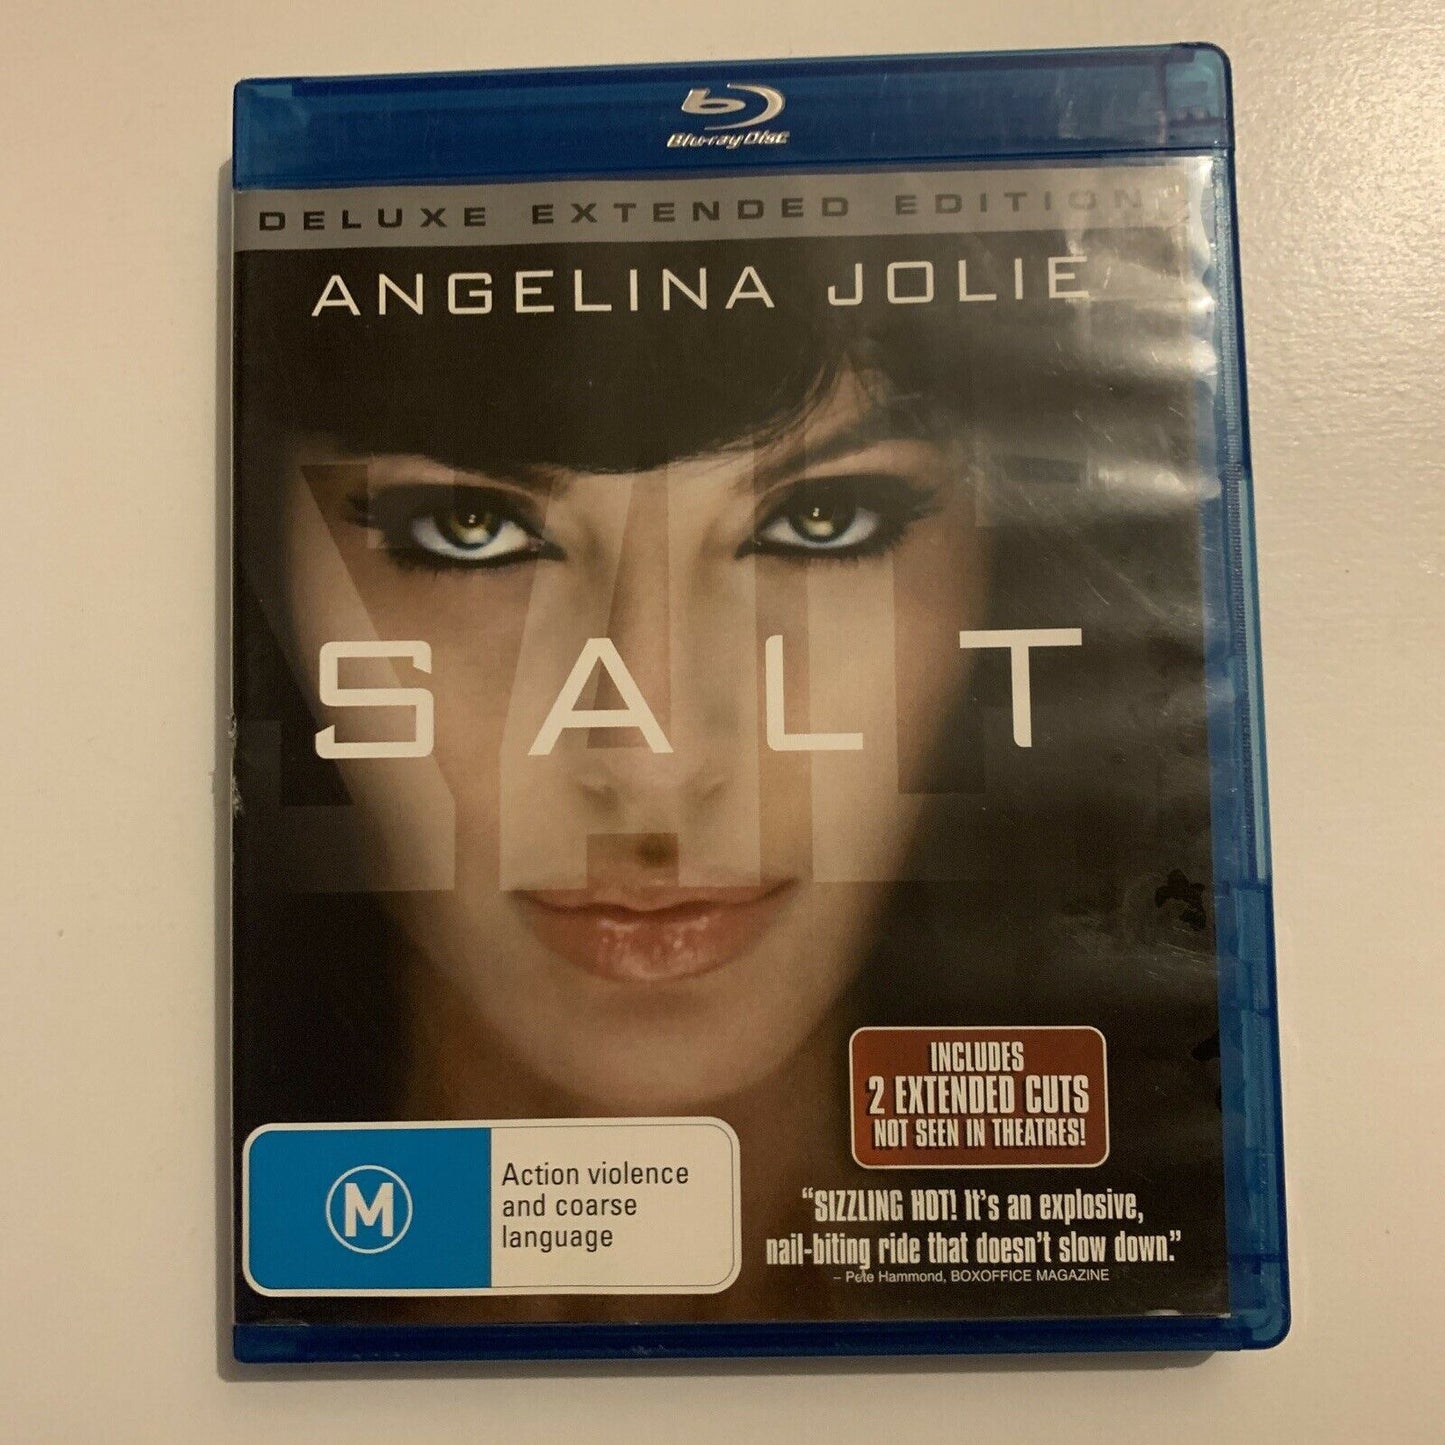 Salt - Deluxe Extended Edition (Bluray, 2010) Angelina Jolie. All Regions